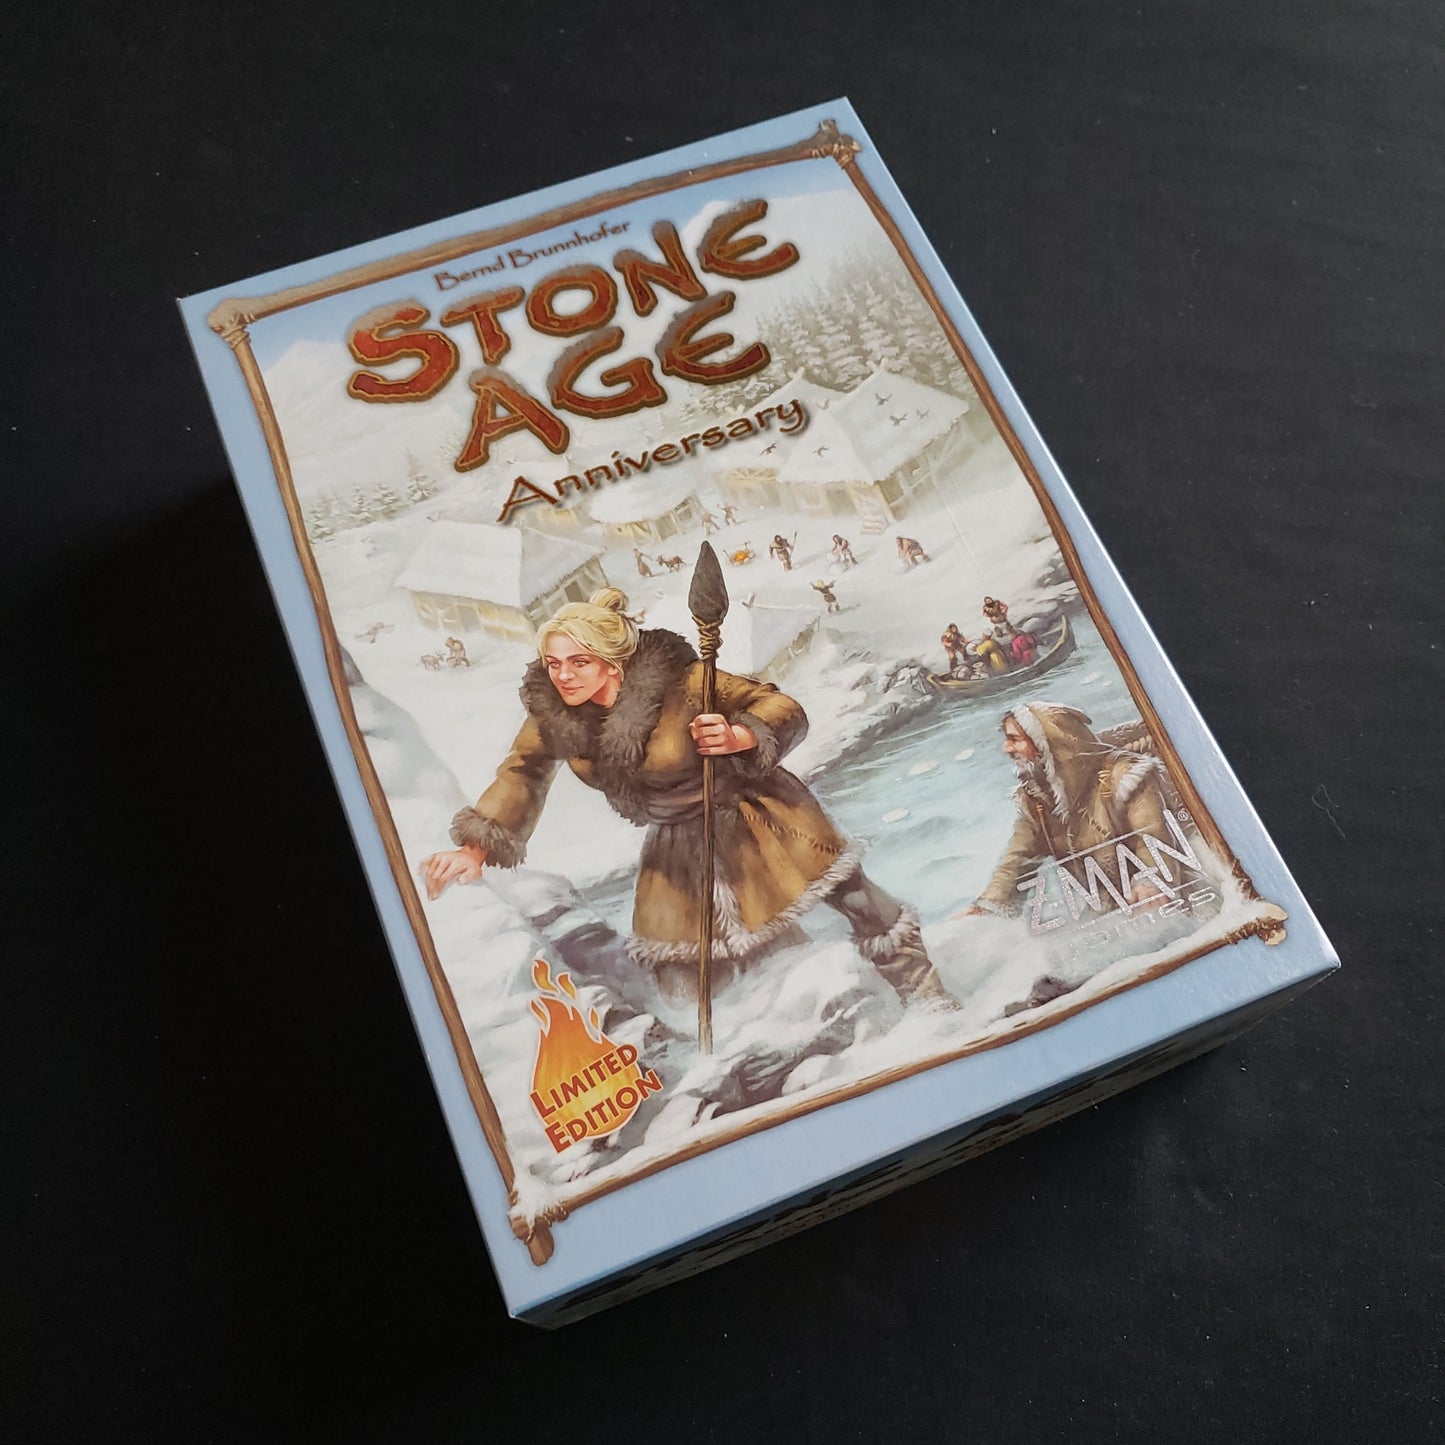 Image shows the front cover of the box of the Stone Age: Anniversary Edition board game